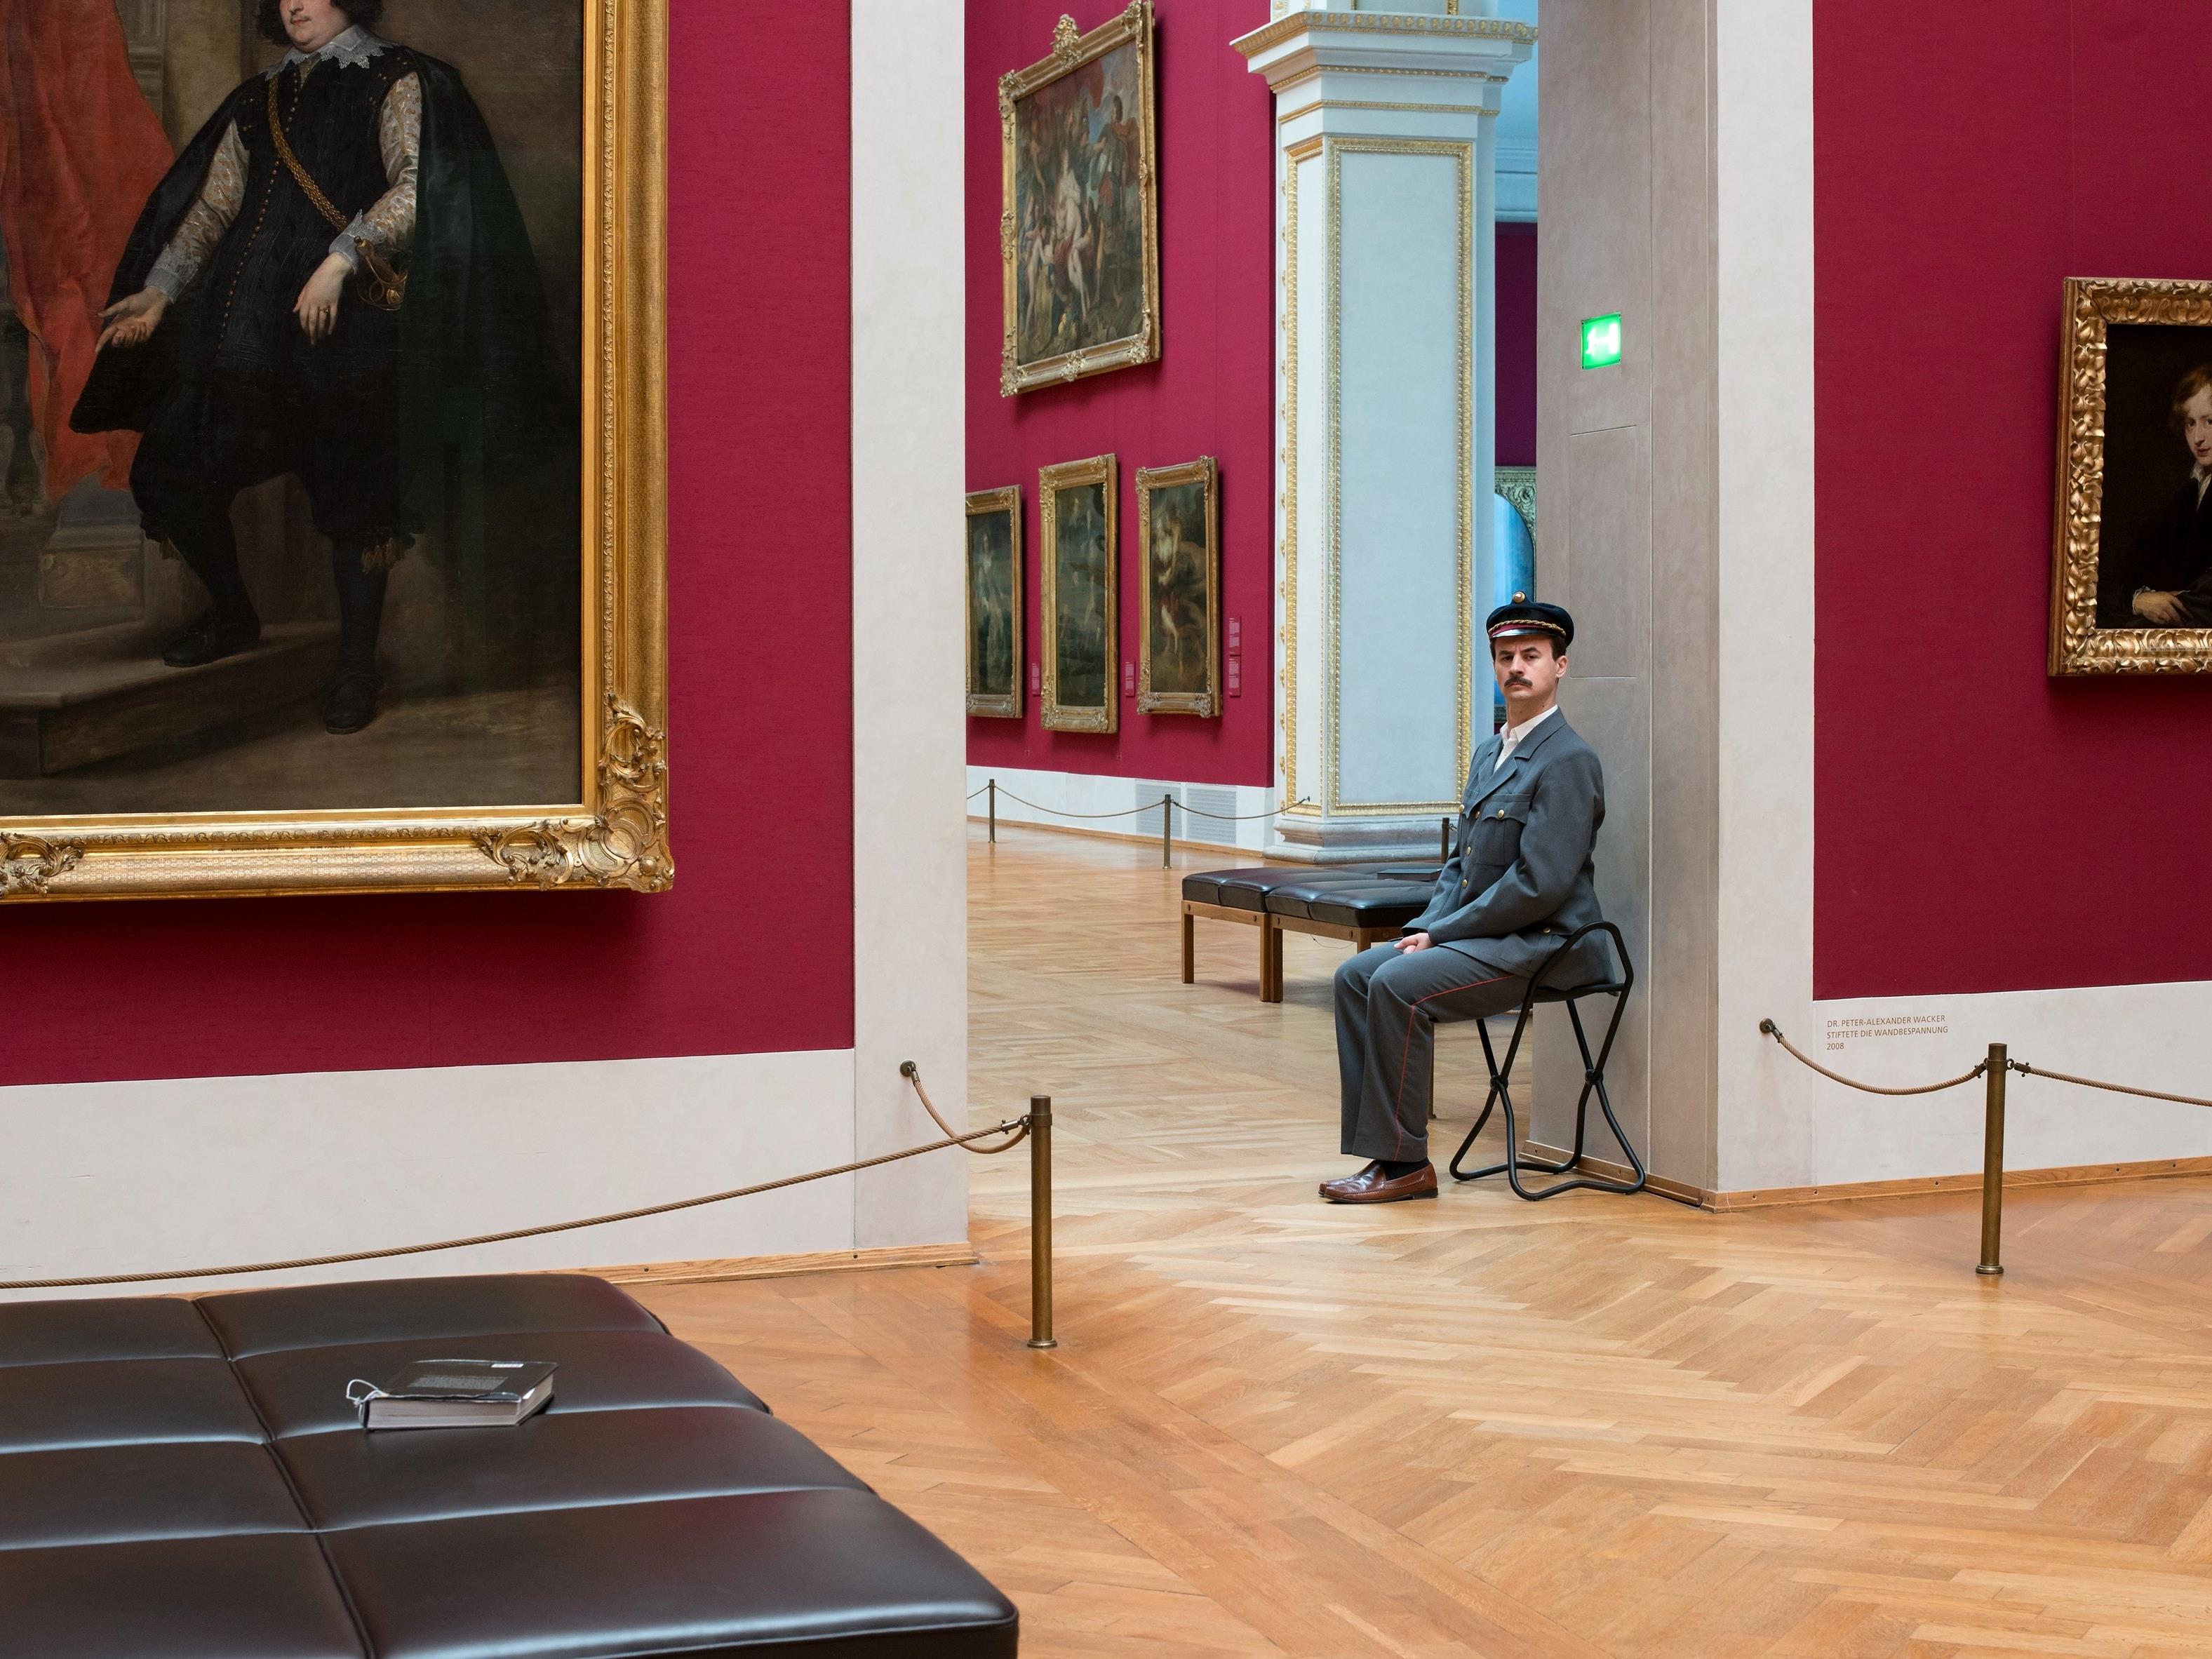 "The Invisible Show" am Dachboden des Wiener Museumsquartiers.